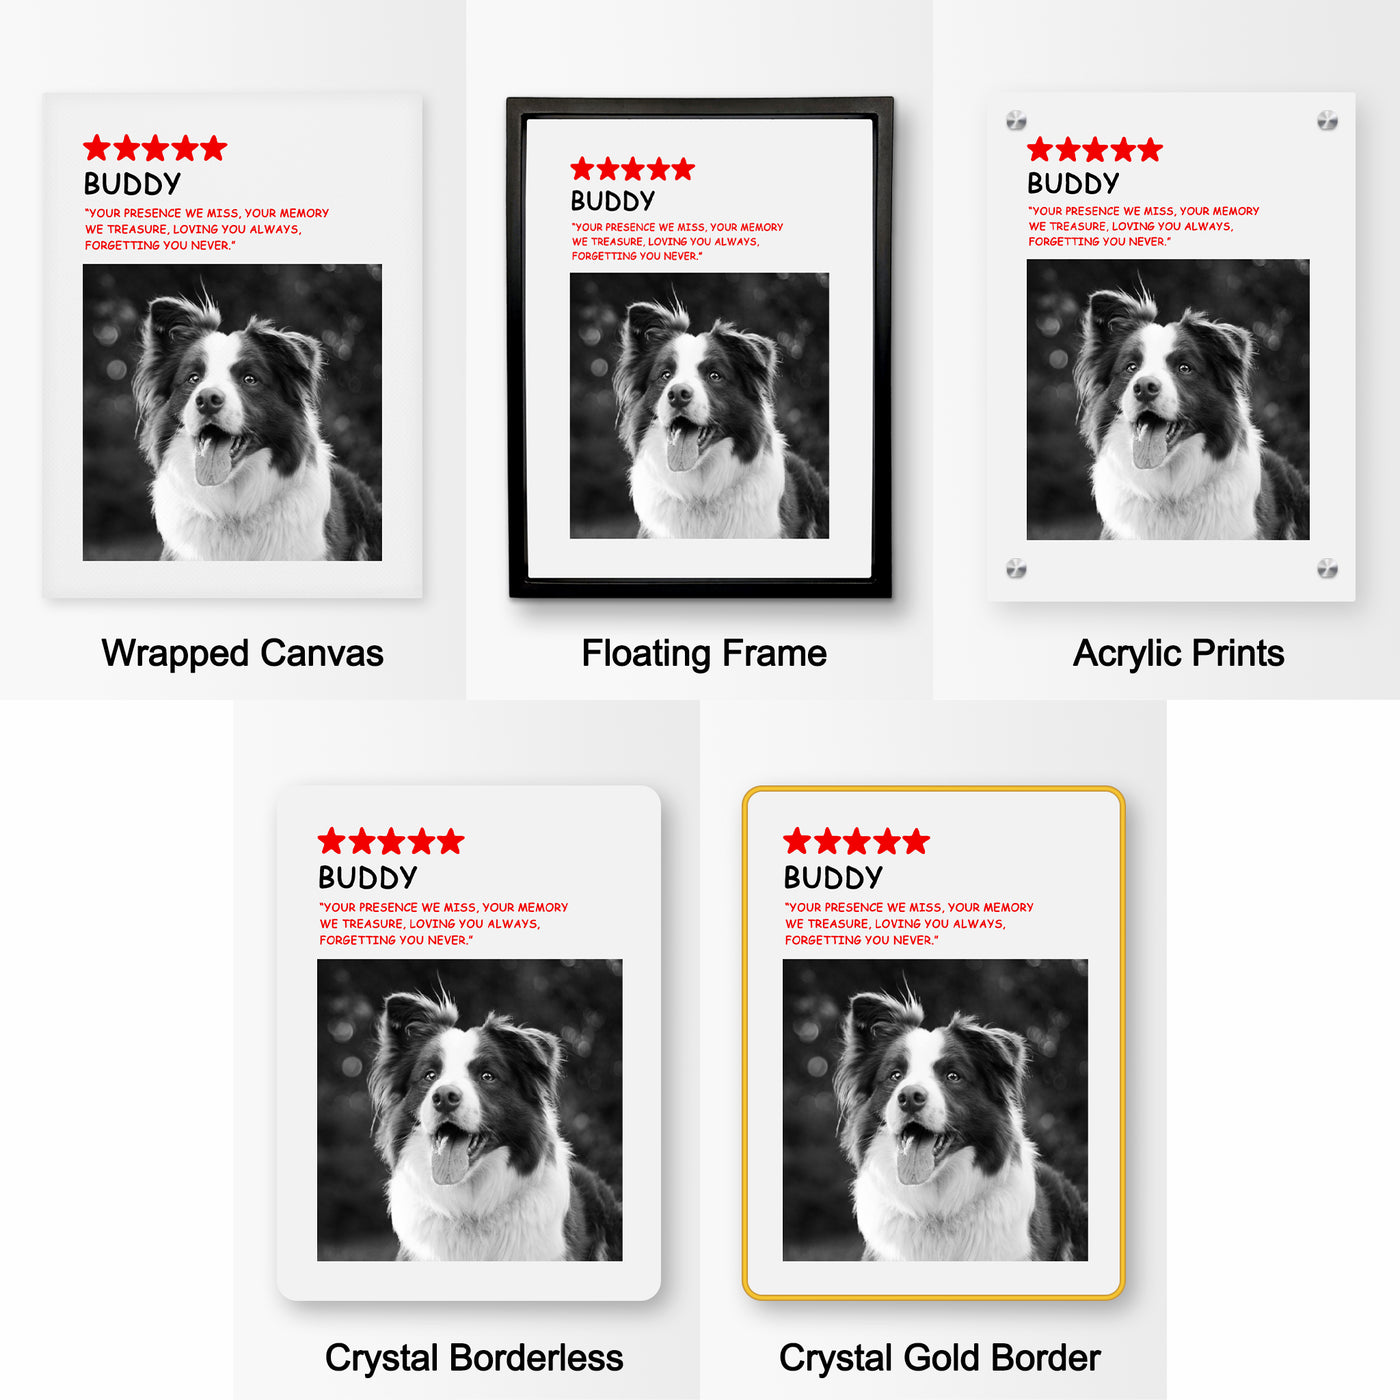 Personalized Pet Portraits Canvas Picture Prints Wall Art with Vogue 5 star Review - The Pet Pillow